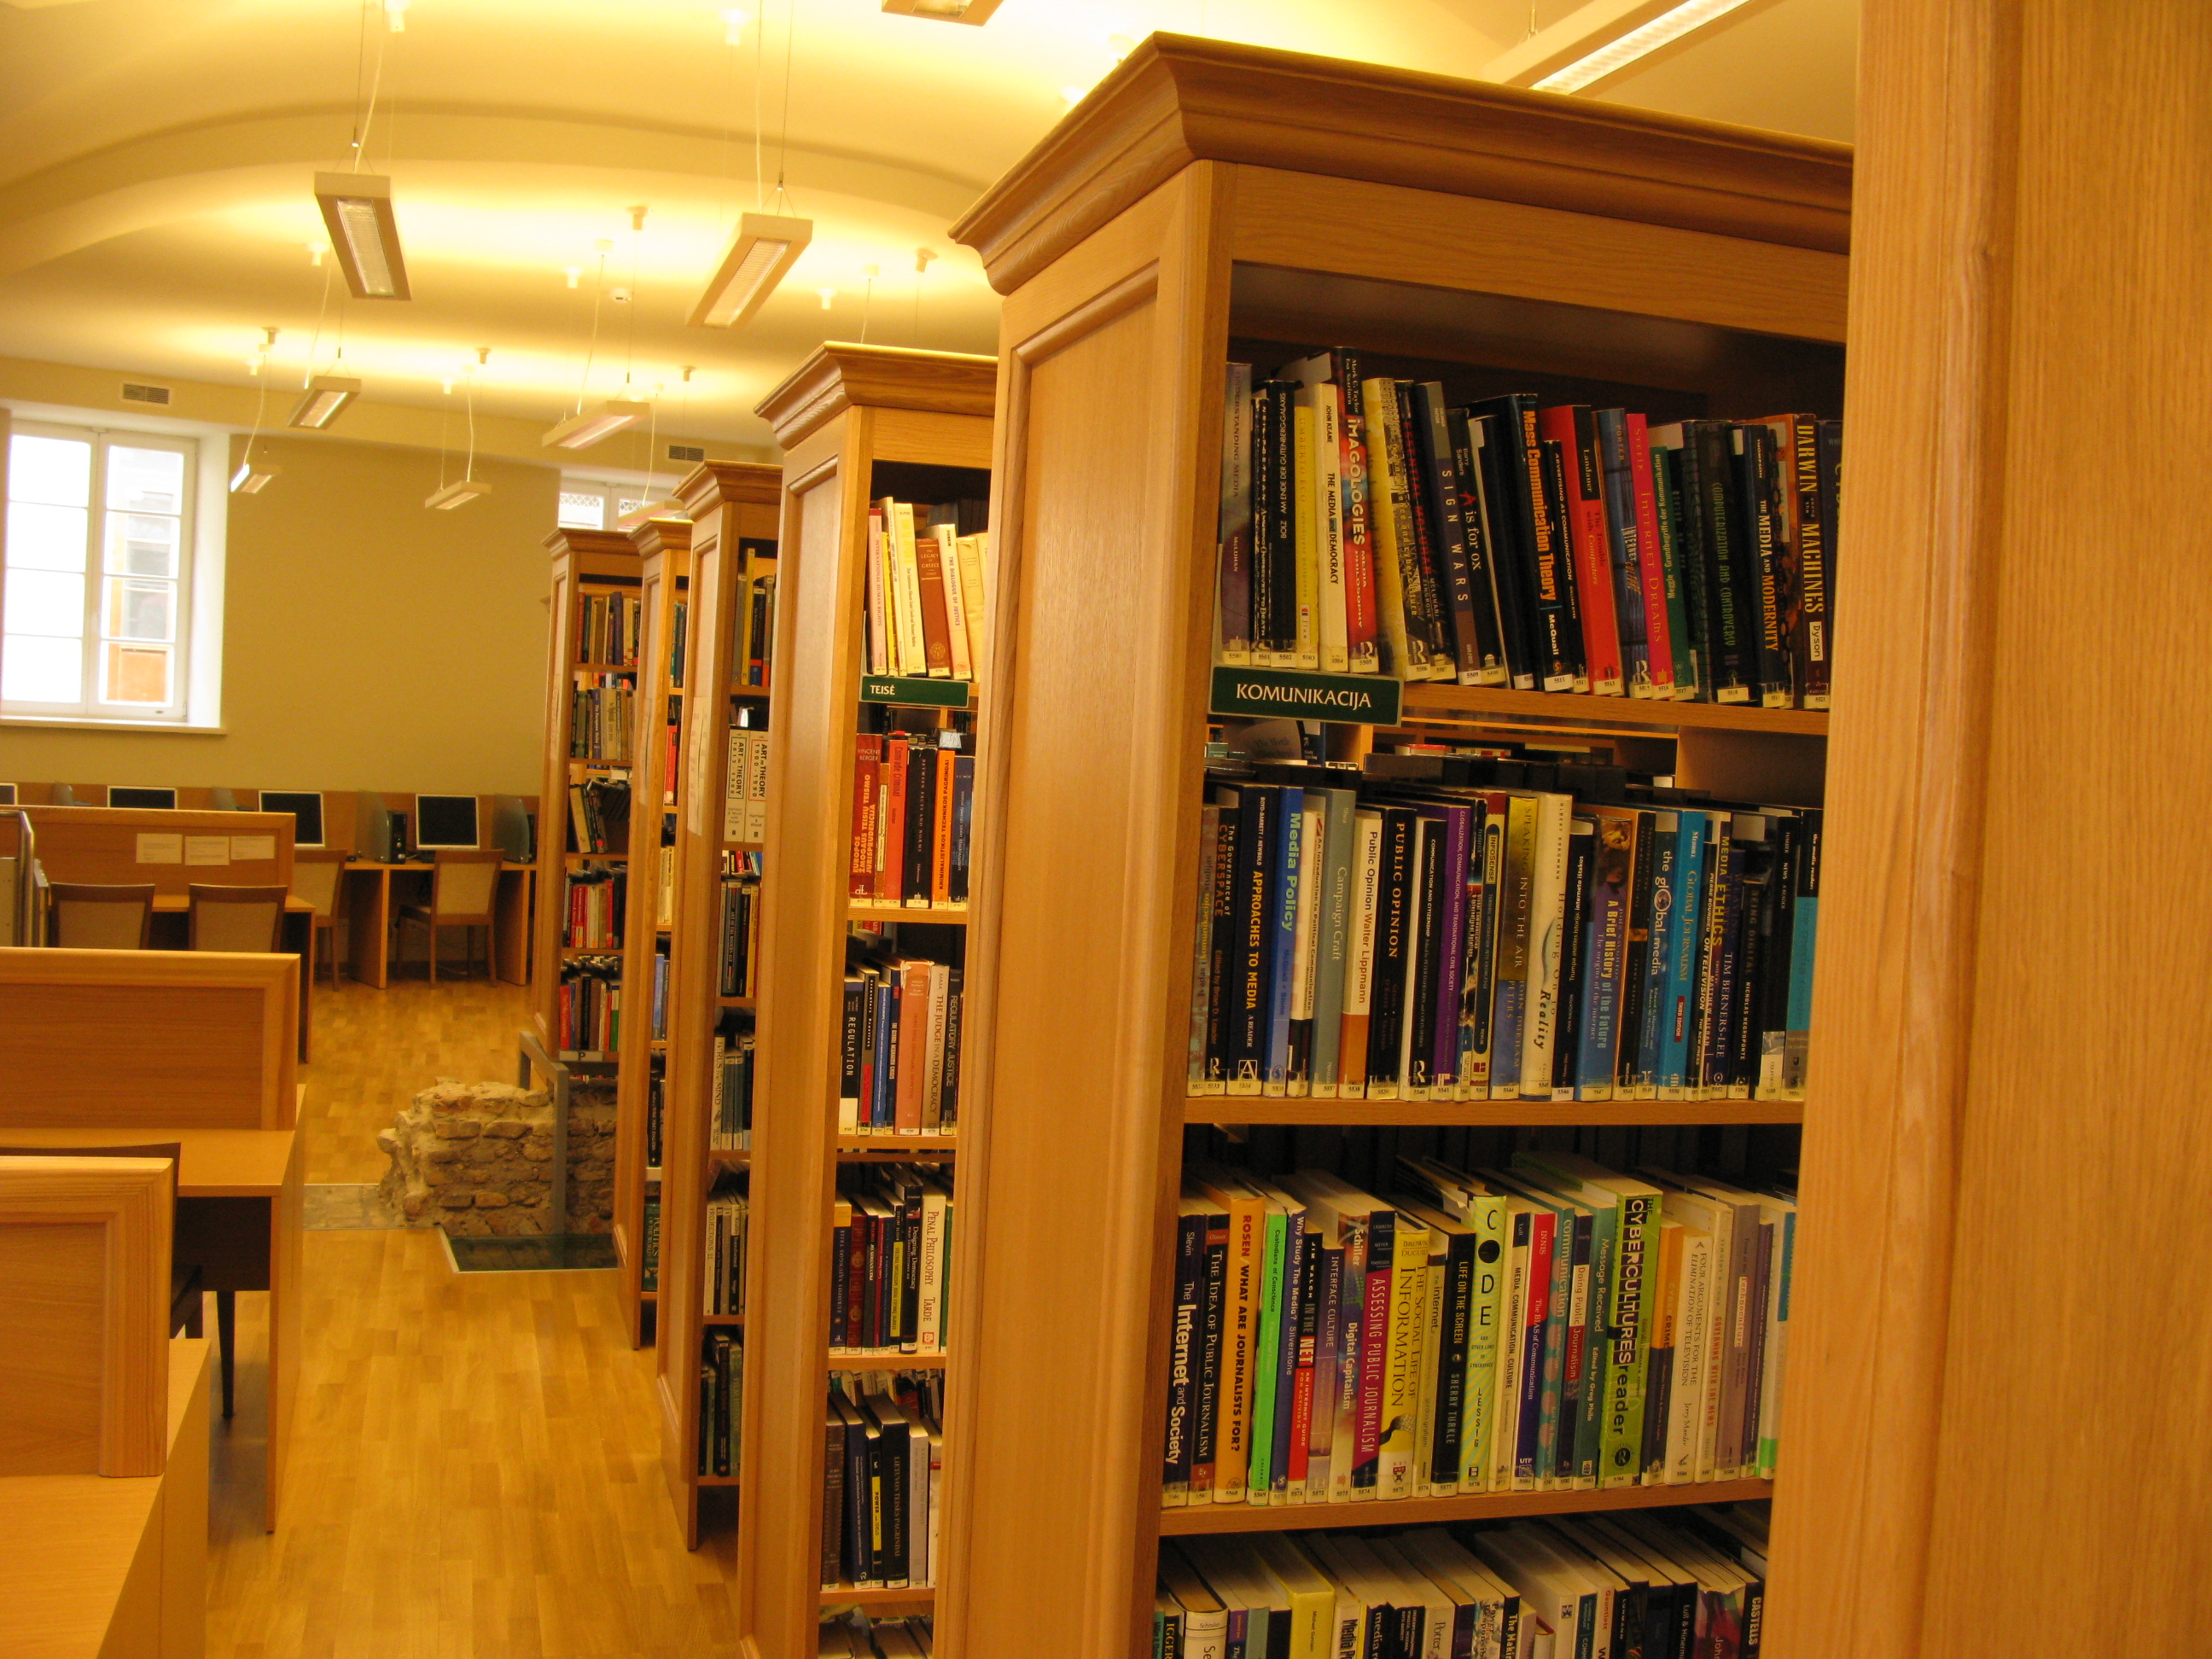 Work of the library during the quarantine